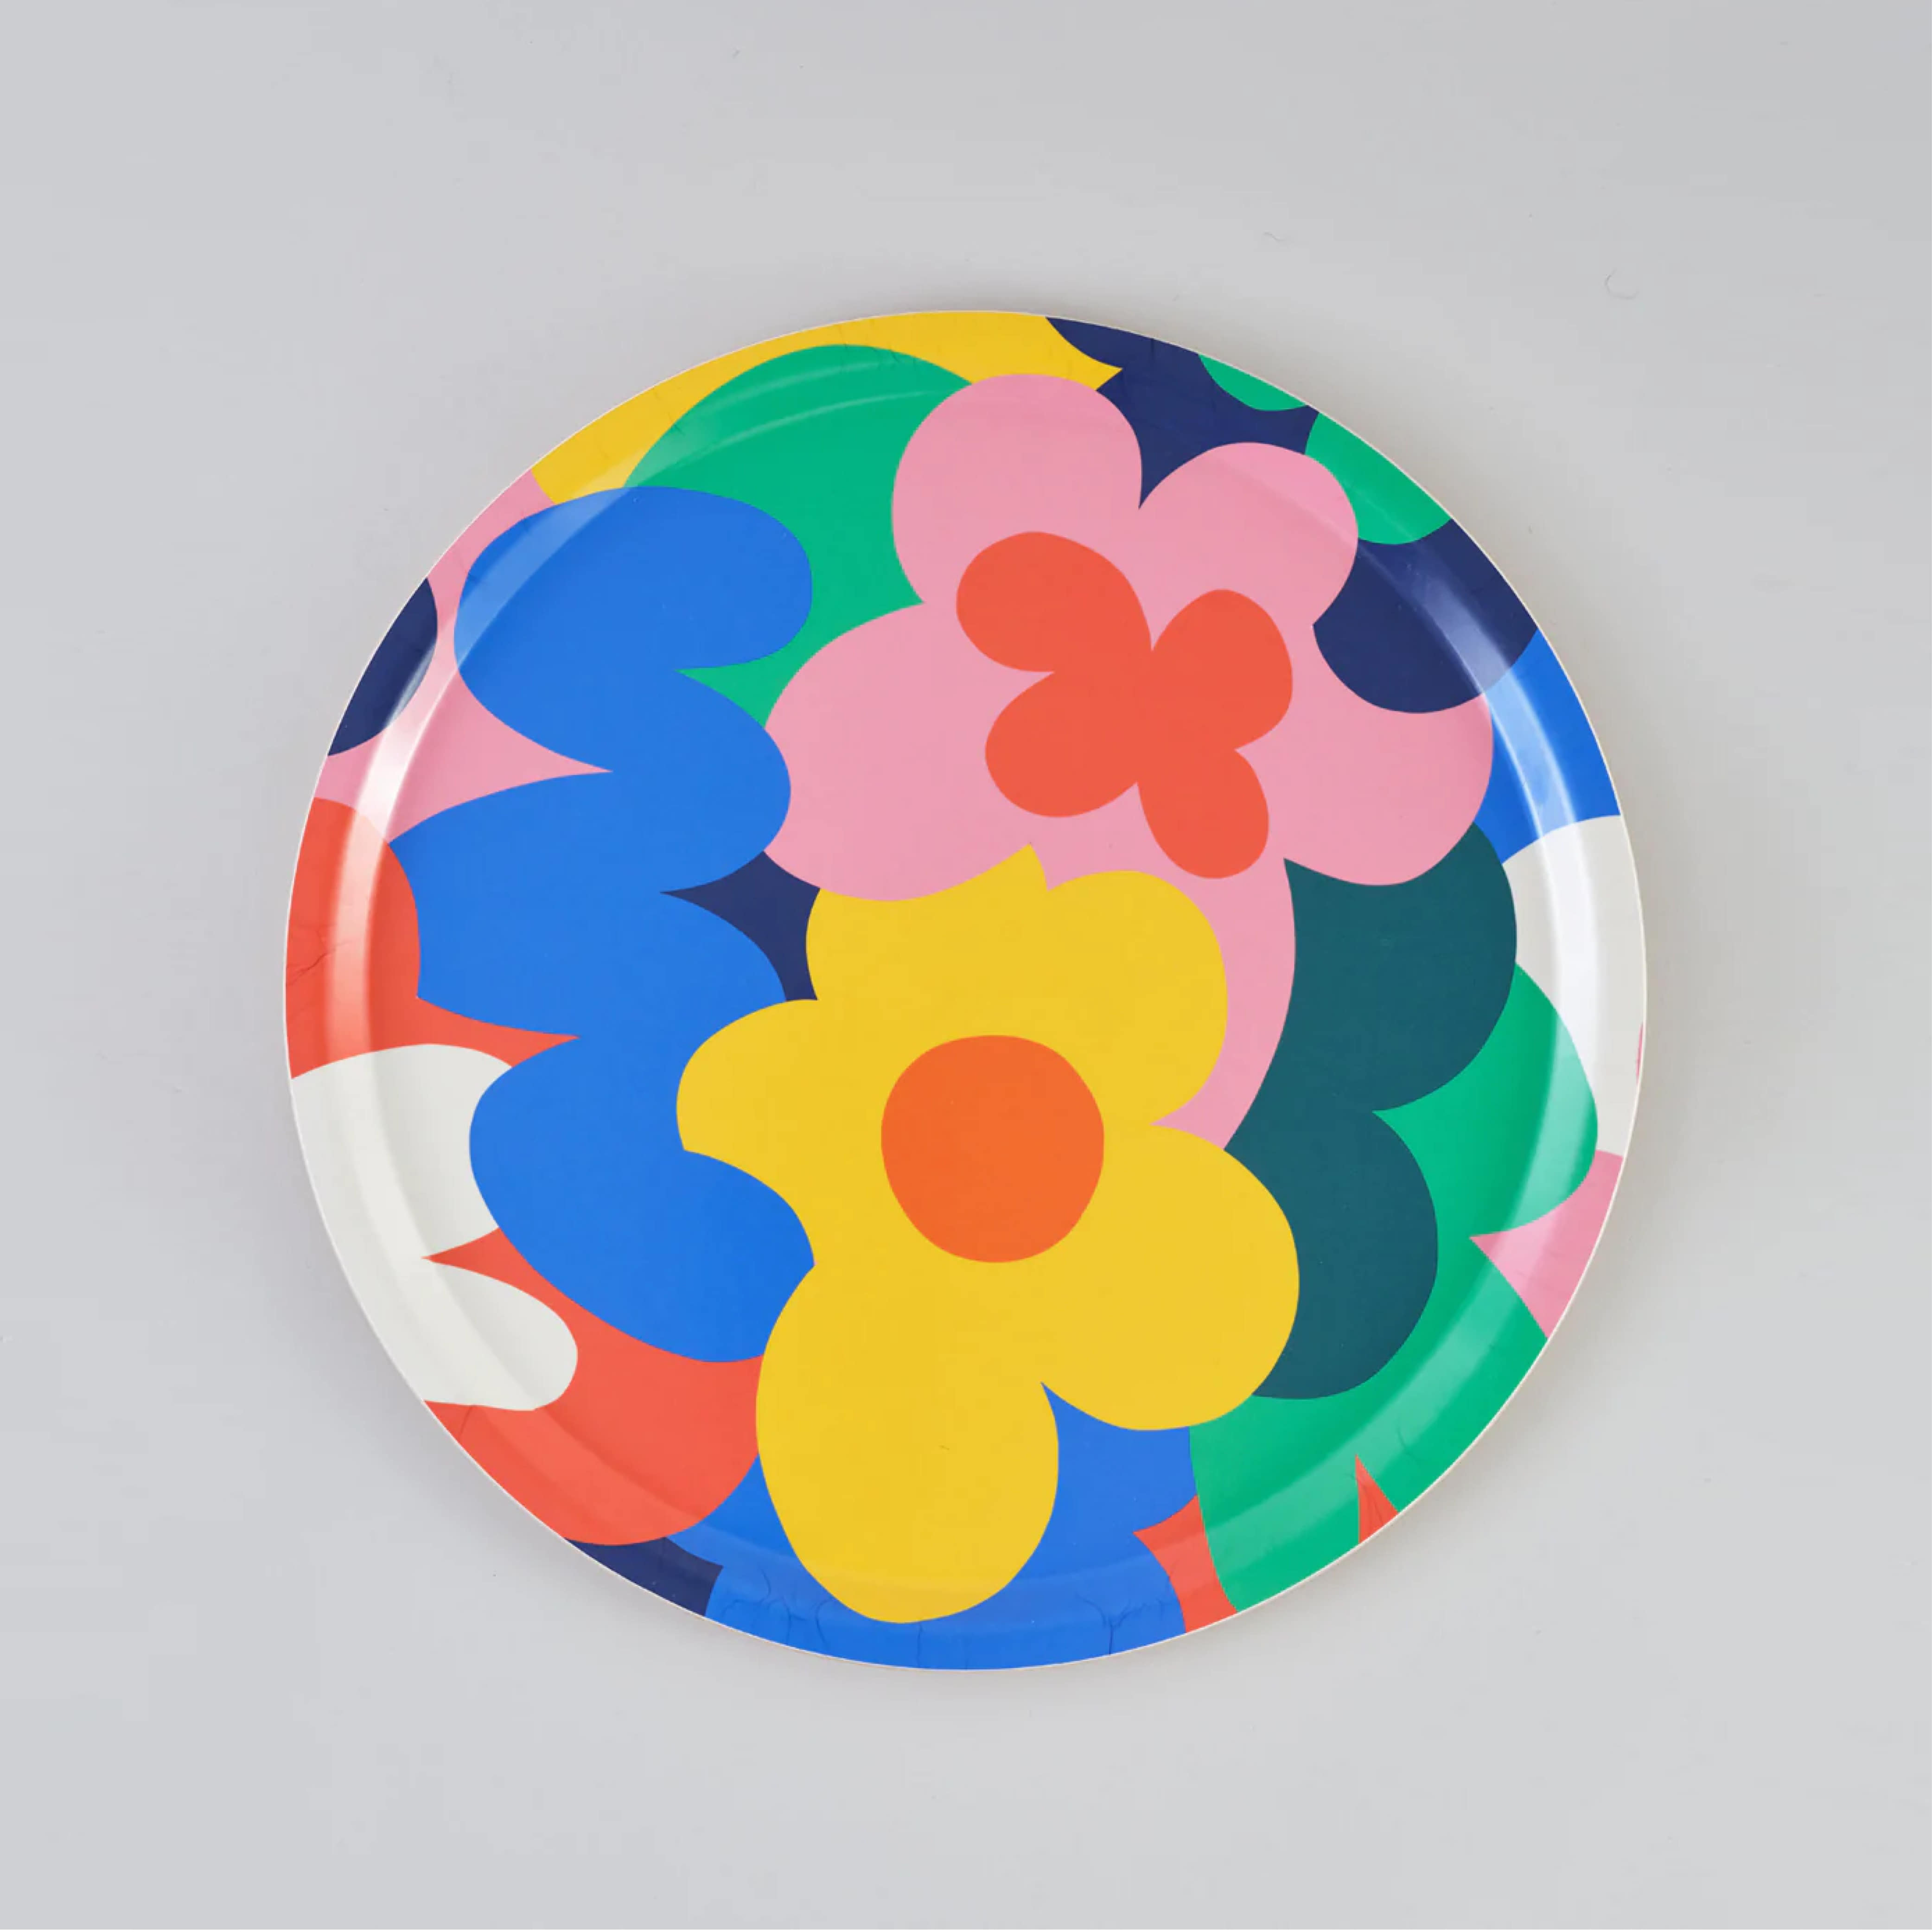 [WRAP] Floral Abstract Round Art Tray